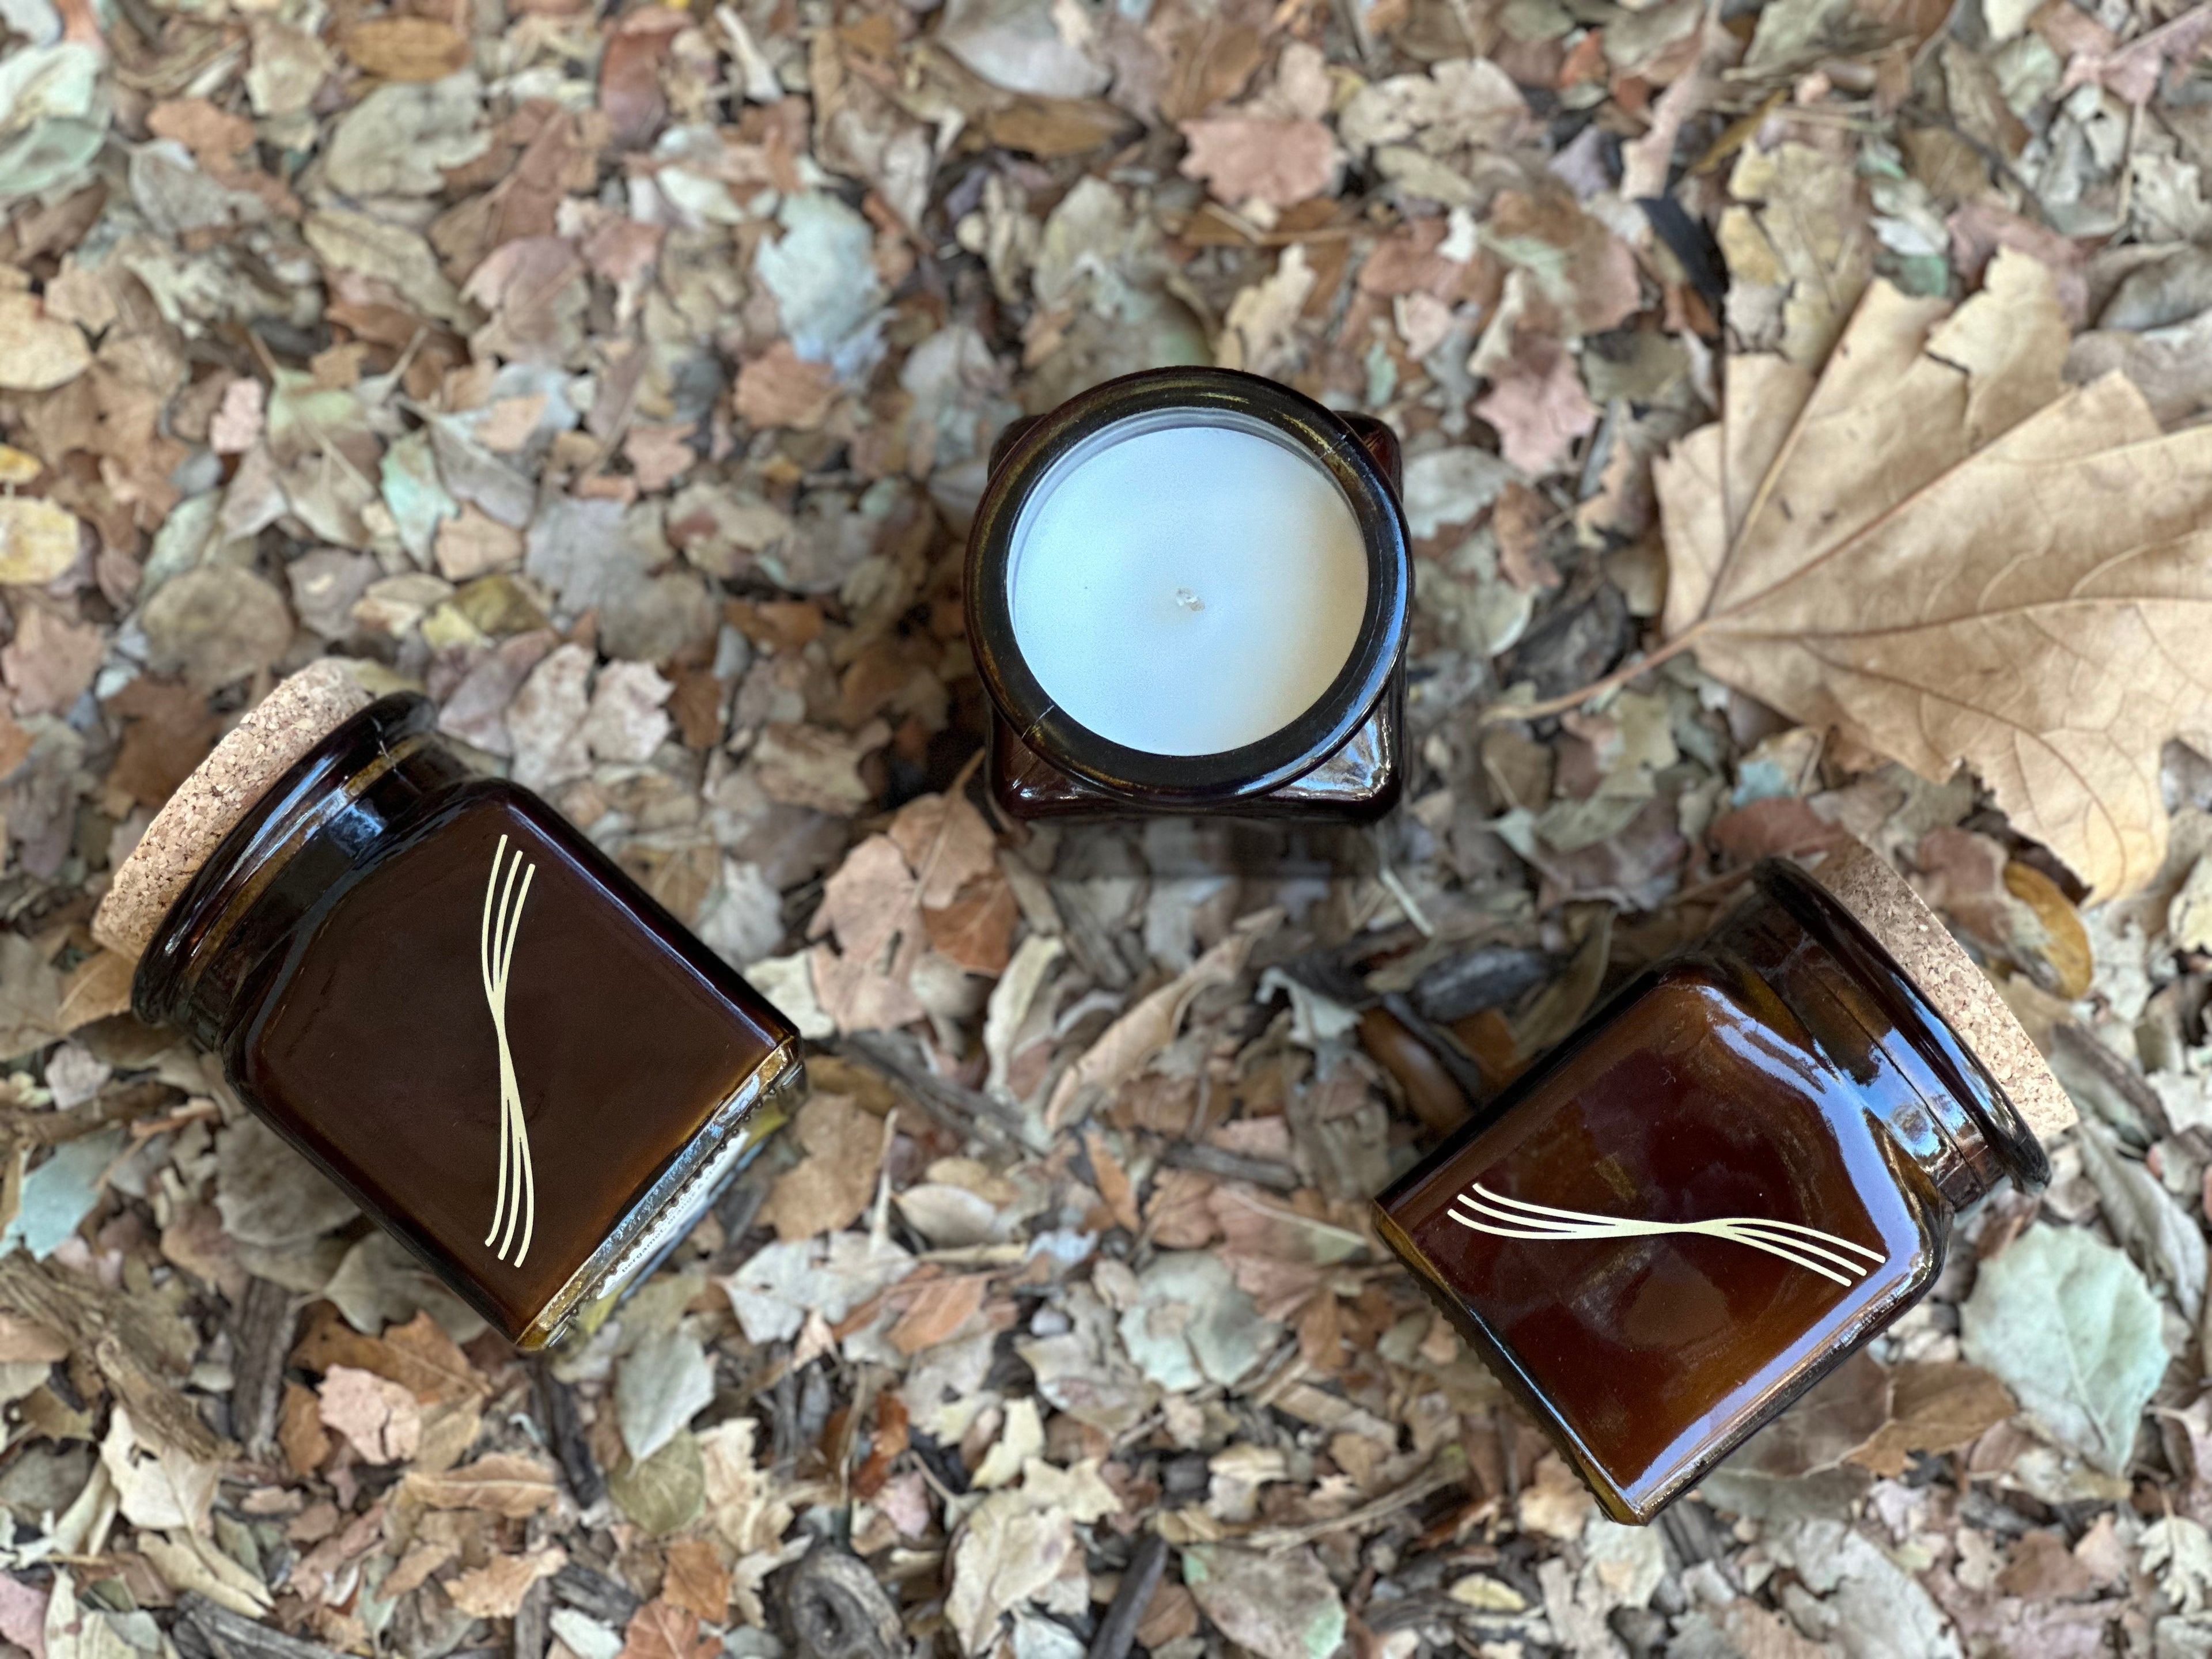 3 square amber glass candle jars with metallic gold printed symbol, laying amongst golden fallen leaves